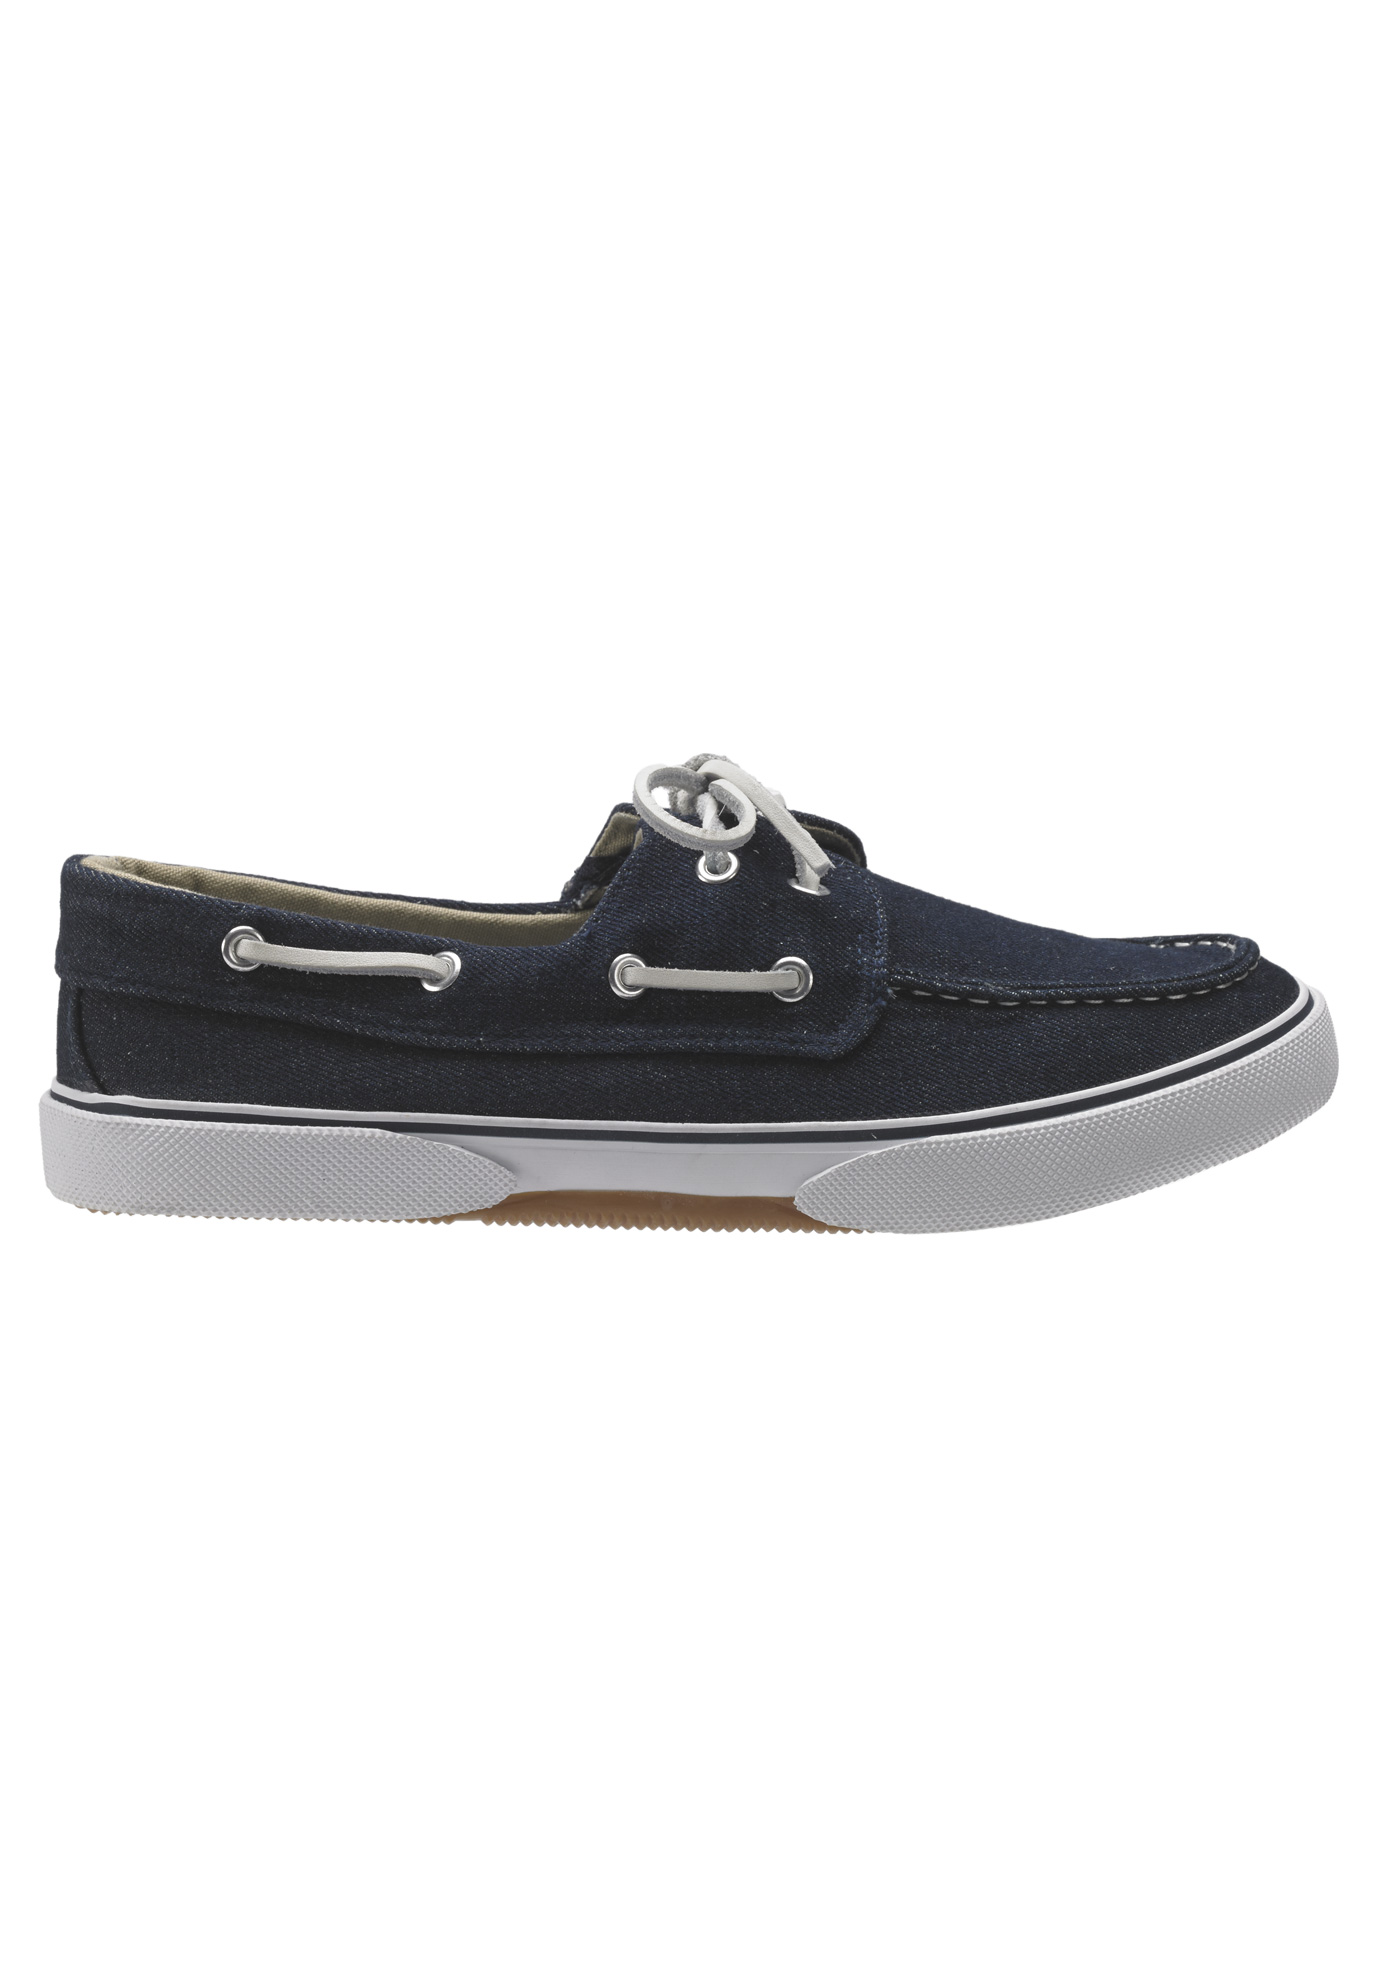 Kingsize Men's Big & Tall Canvas Boat Shoe Loafers Shoes - image 4 of 6